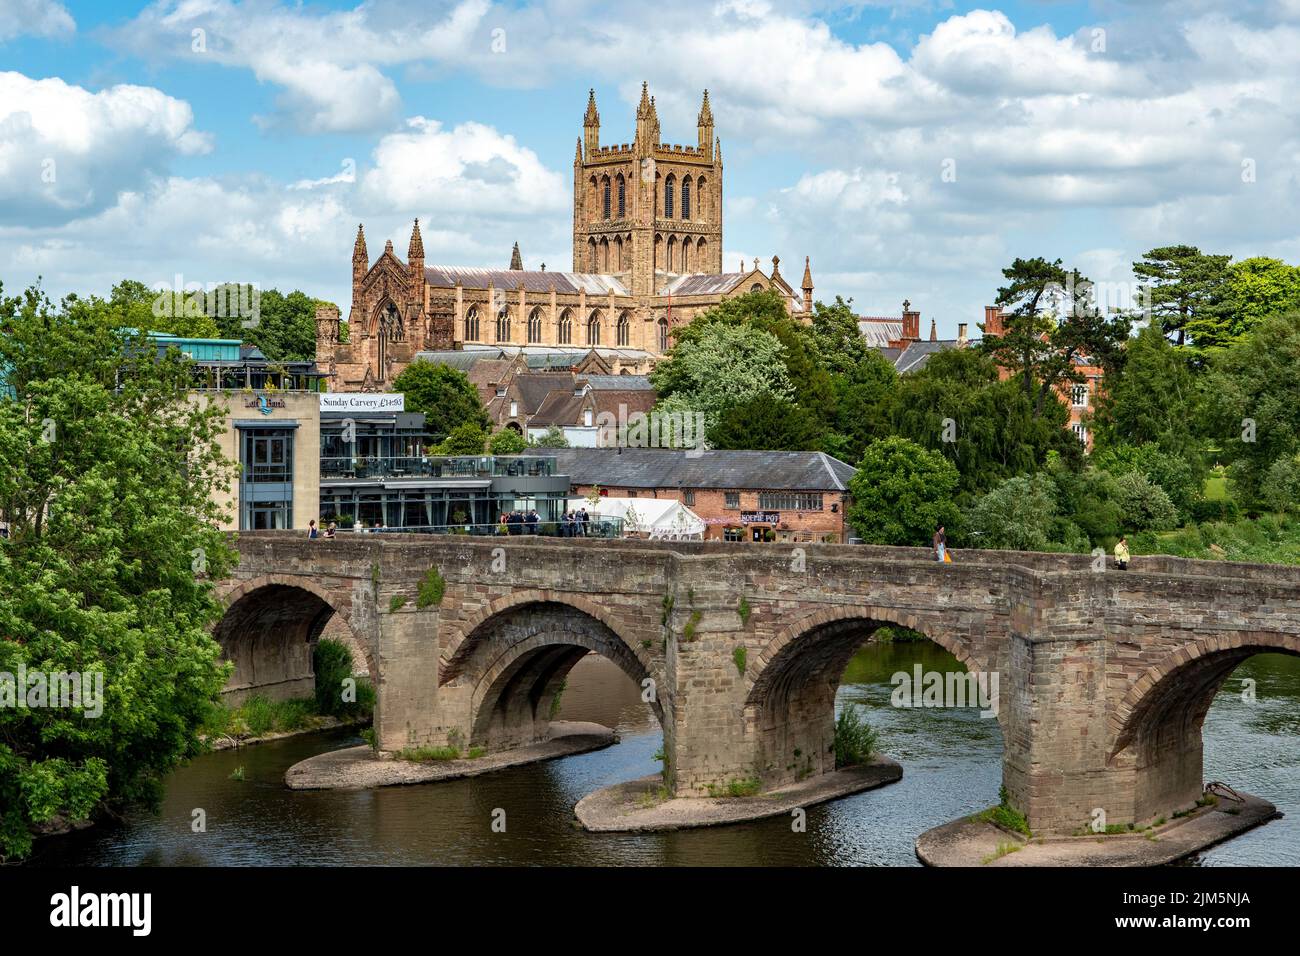 The Old Bridge und Hereford Cathedral, Hereford, Herefordshire, England Stockfoto